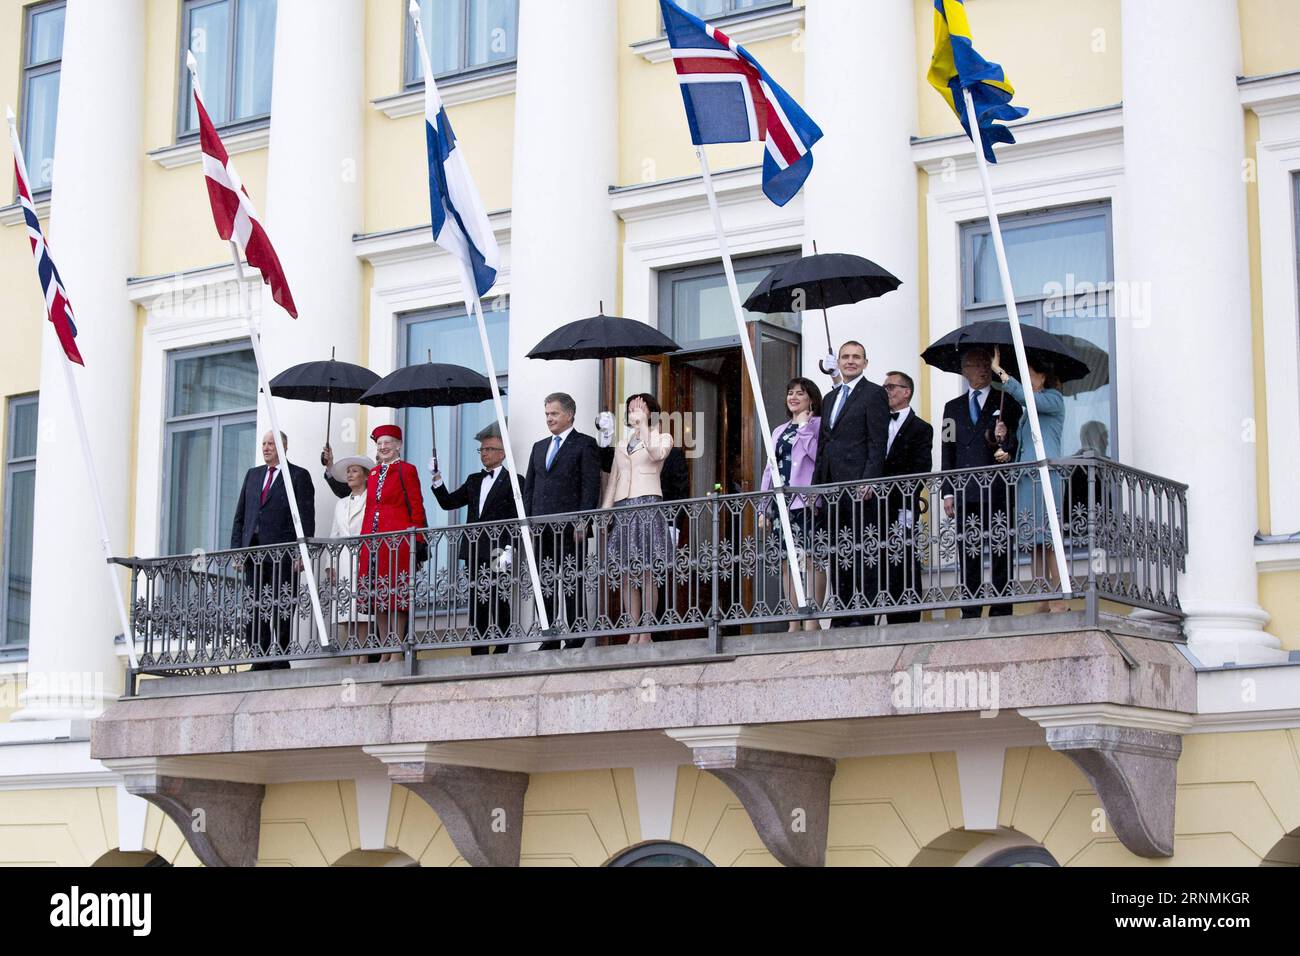 Queen silvia 2 l hi-res stock photography and images - Alamy